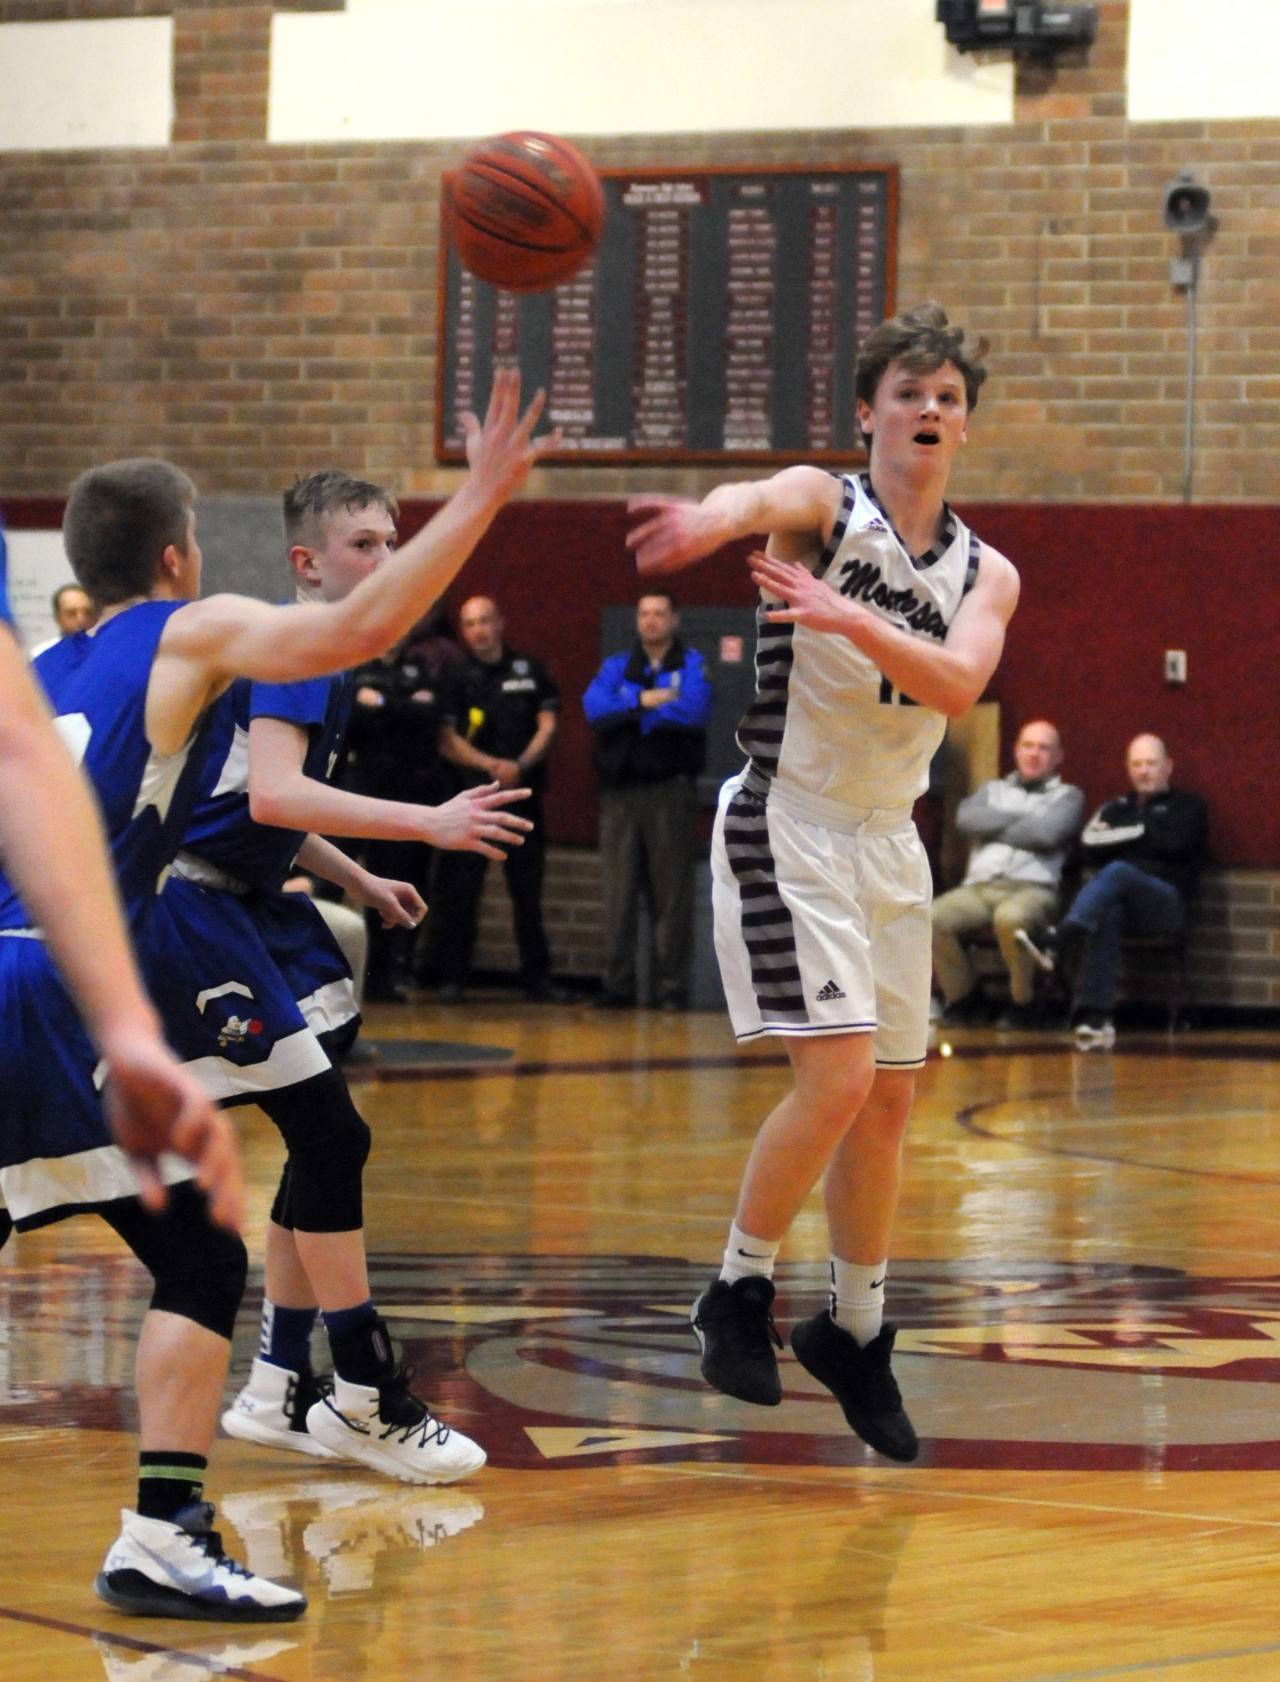 Montesano’s Carter Olsen, right, dishes a no-look pass for an assist during the Bulldogs’ 71-43 victory in a 1A District 4 Tournament consolation game Tuesday at Montesano High School. Olsen had 20 points to lead all scorers. (Ryan Sparks | Grays Harbor News Group)